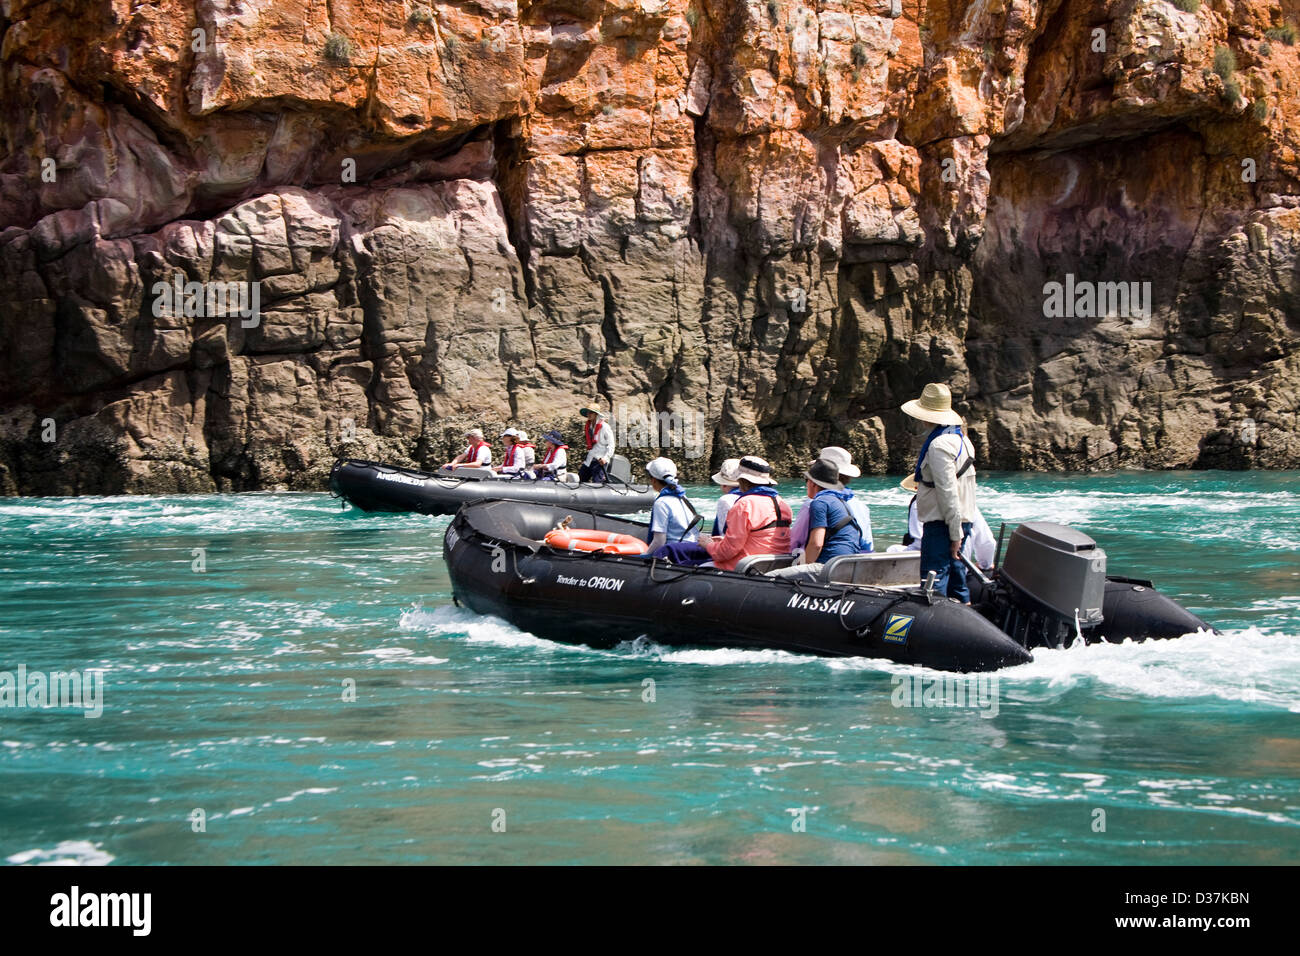 Zodiacs from the Aussie expedition cruiser Orion approach the famous Horizontal Waterfalls of Talbot Bay, Kimberley region, Aust Stock Photo